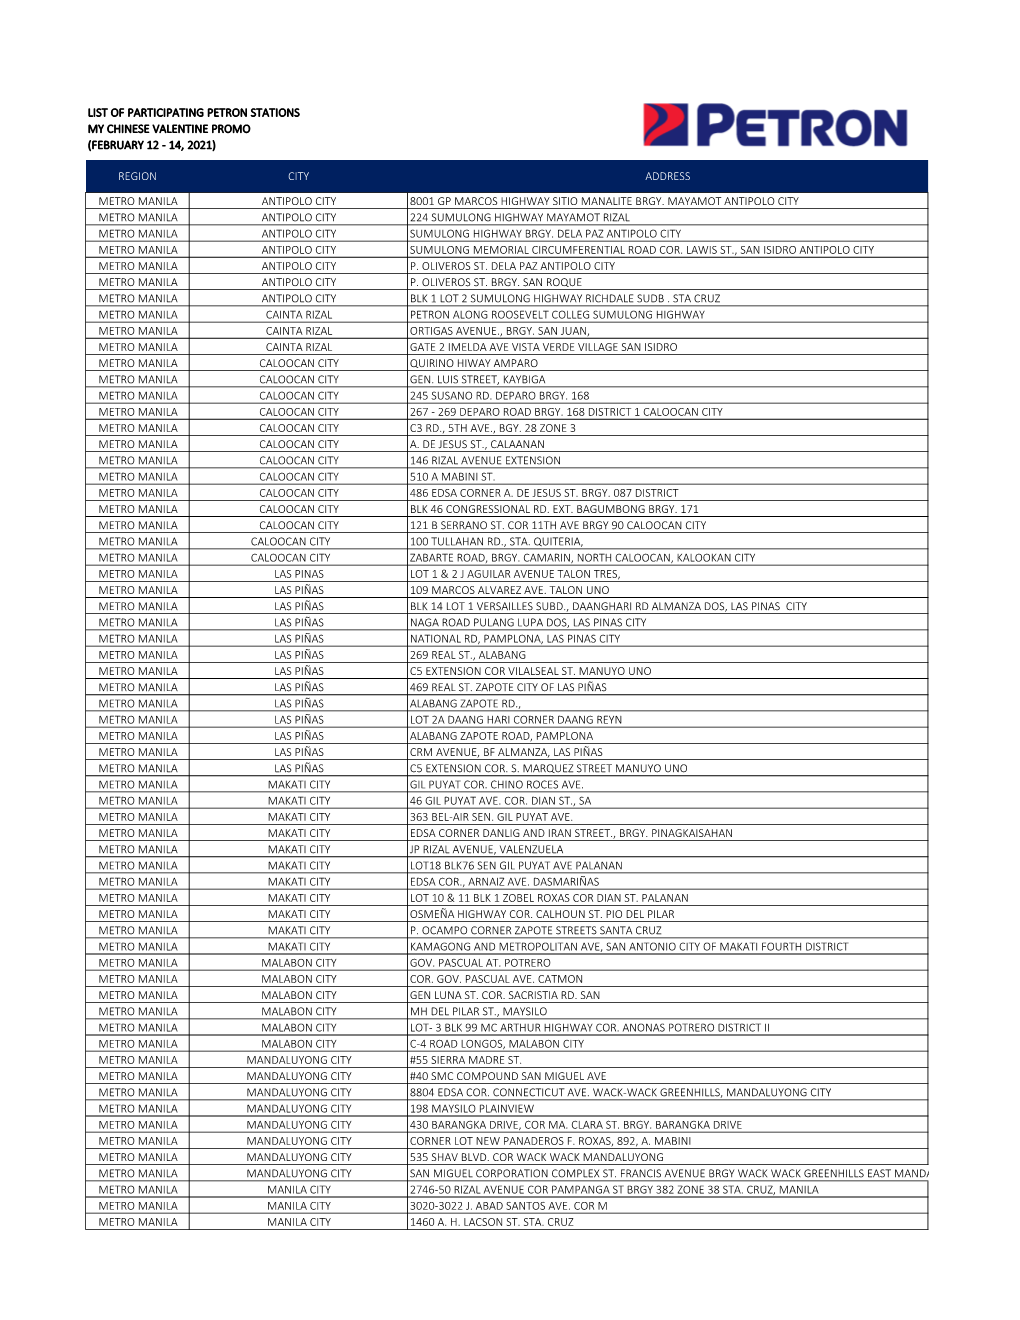 List of Participating Petron Stations My Chinese Valentine Promo (February 12 - 14, 2021)